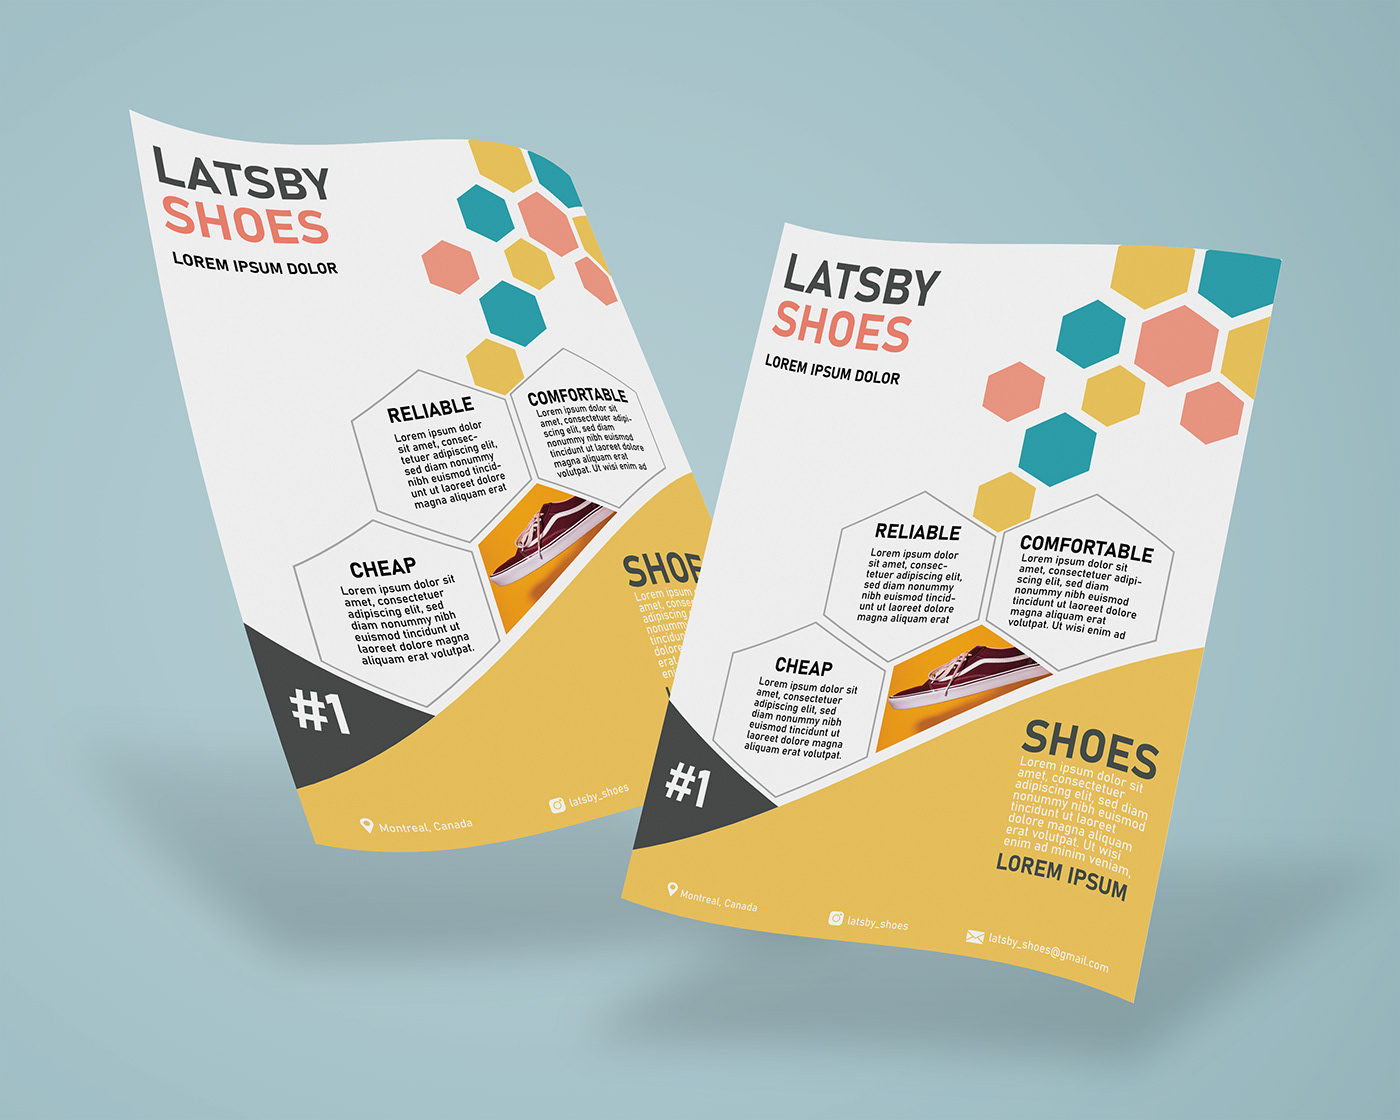 This is a high quality A4 sized flyer for shoes and marketing.